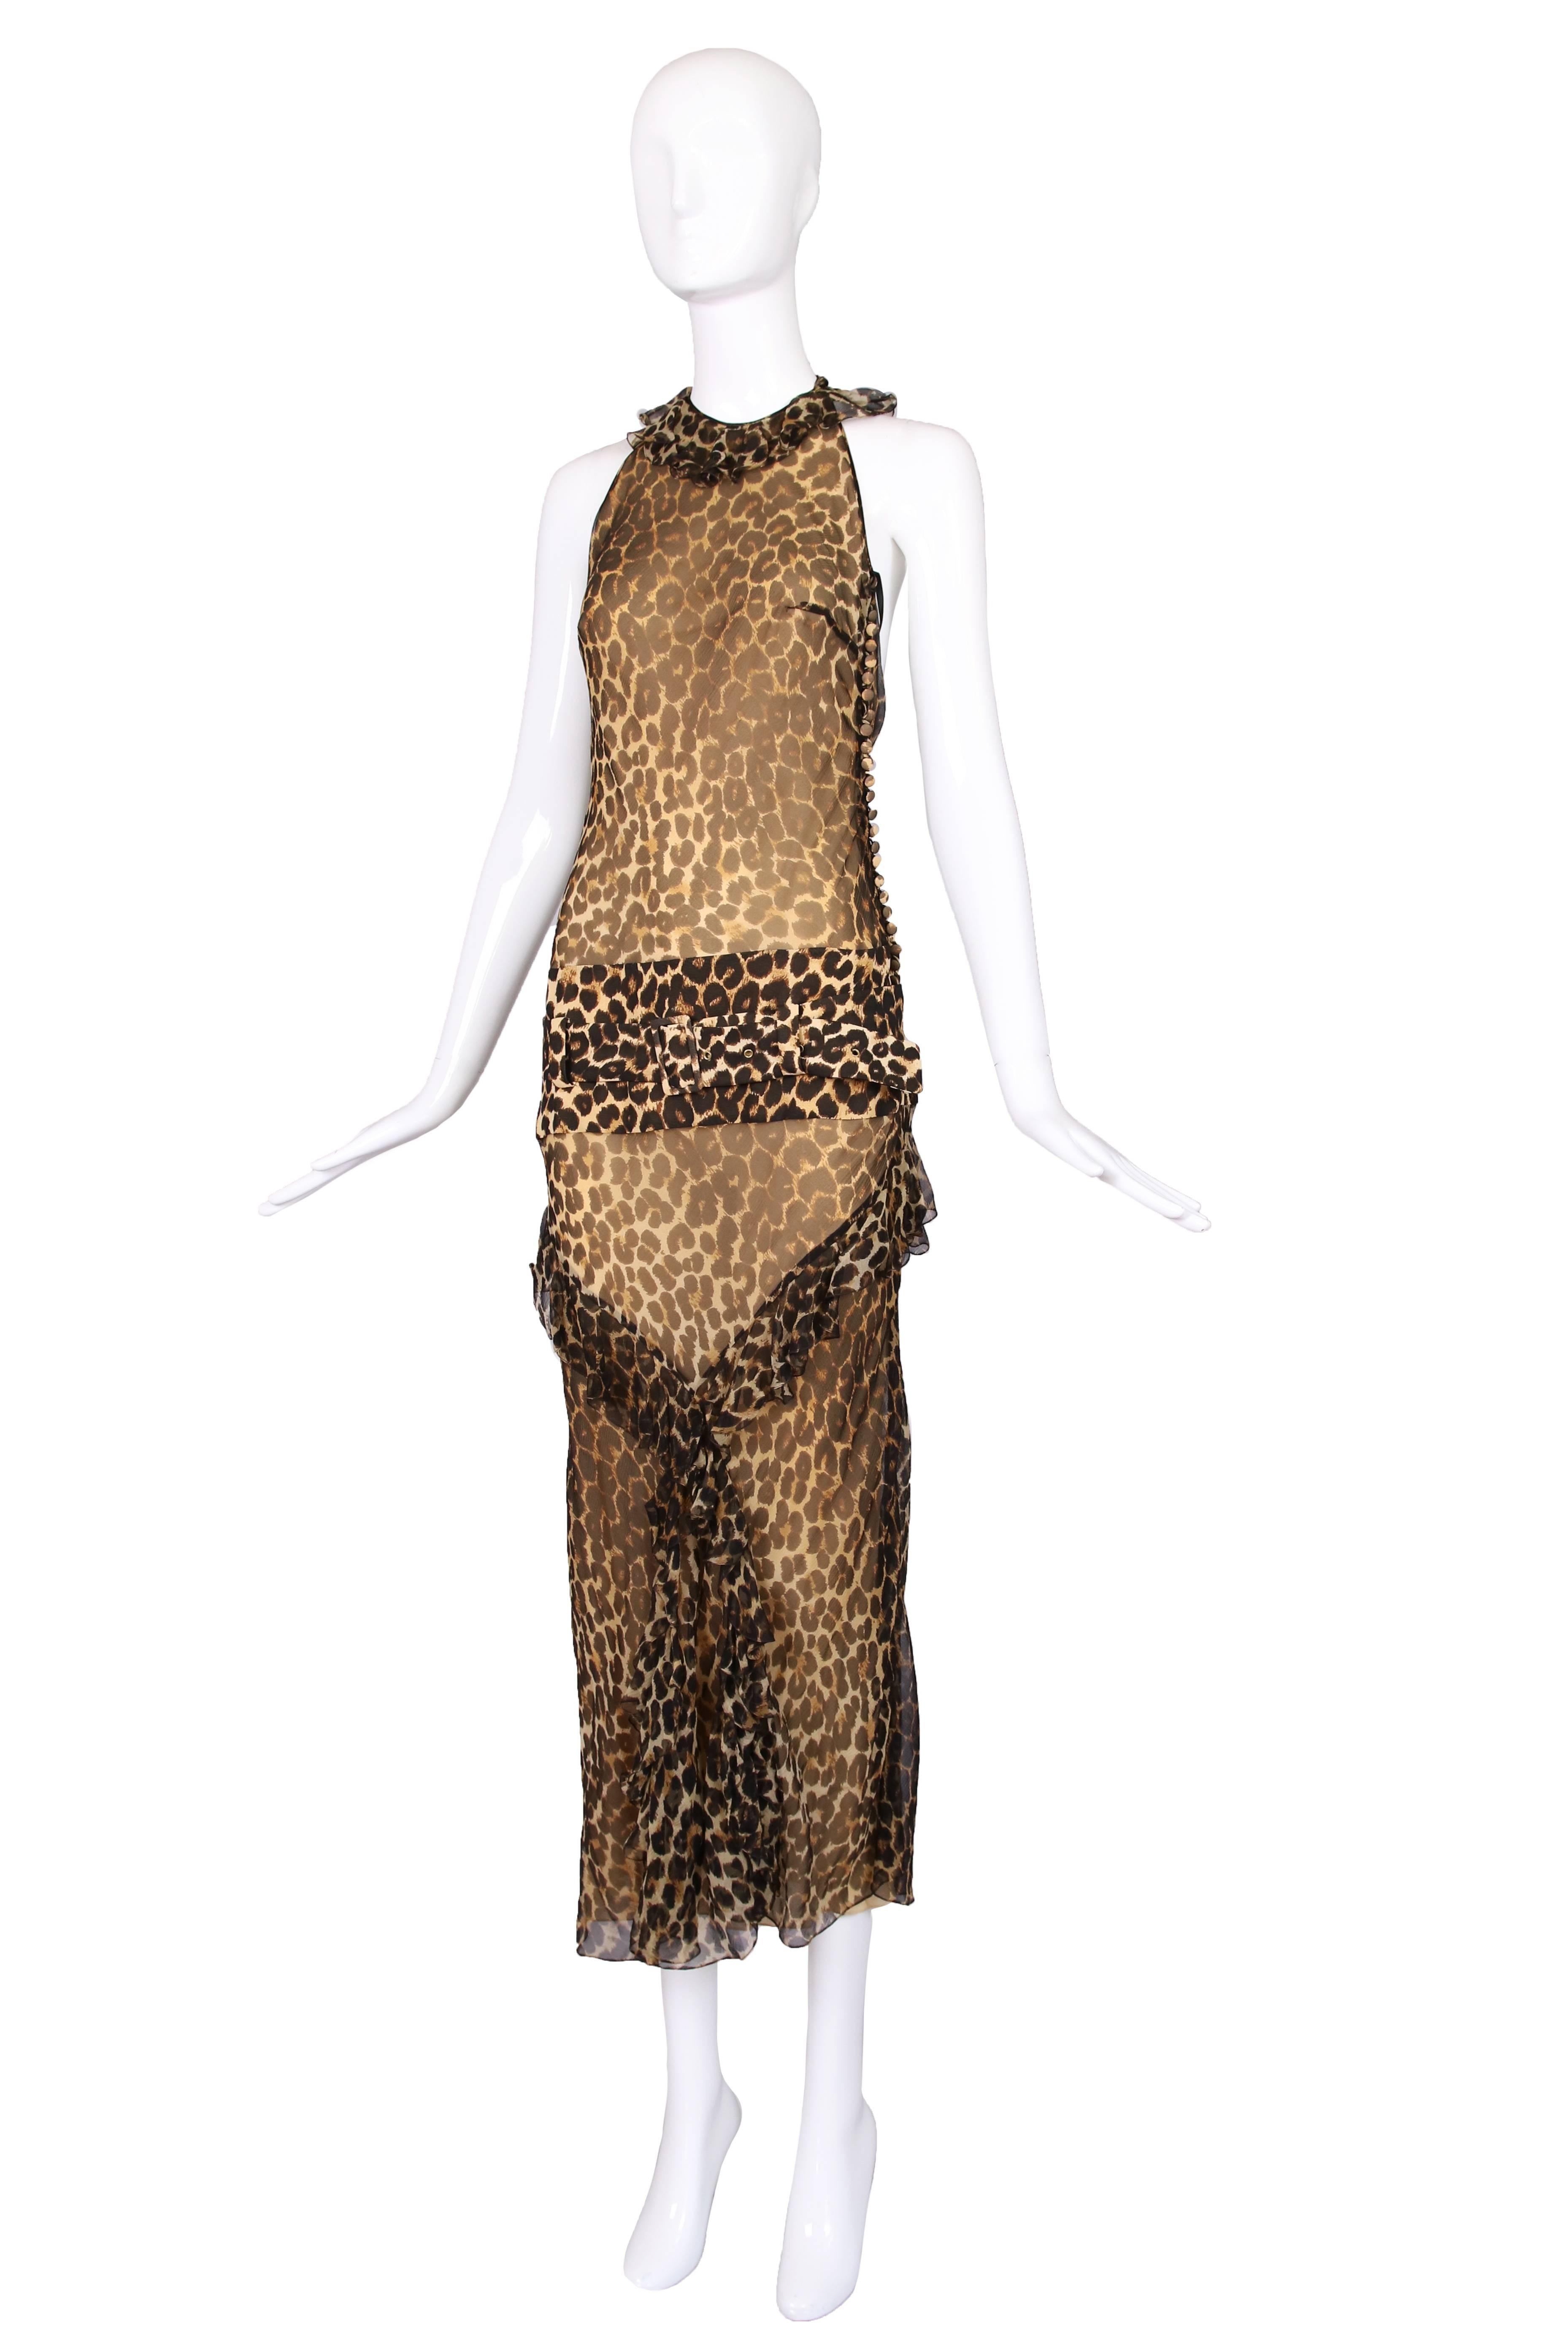 John Galliano leopard print silk chiffon halter gown with ruffle trim, drop waist and belt. In excellent condition. Size S.